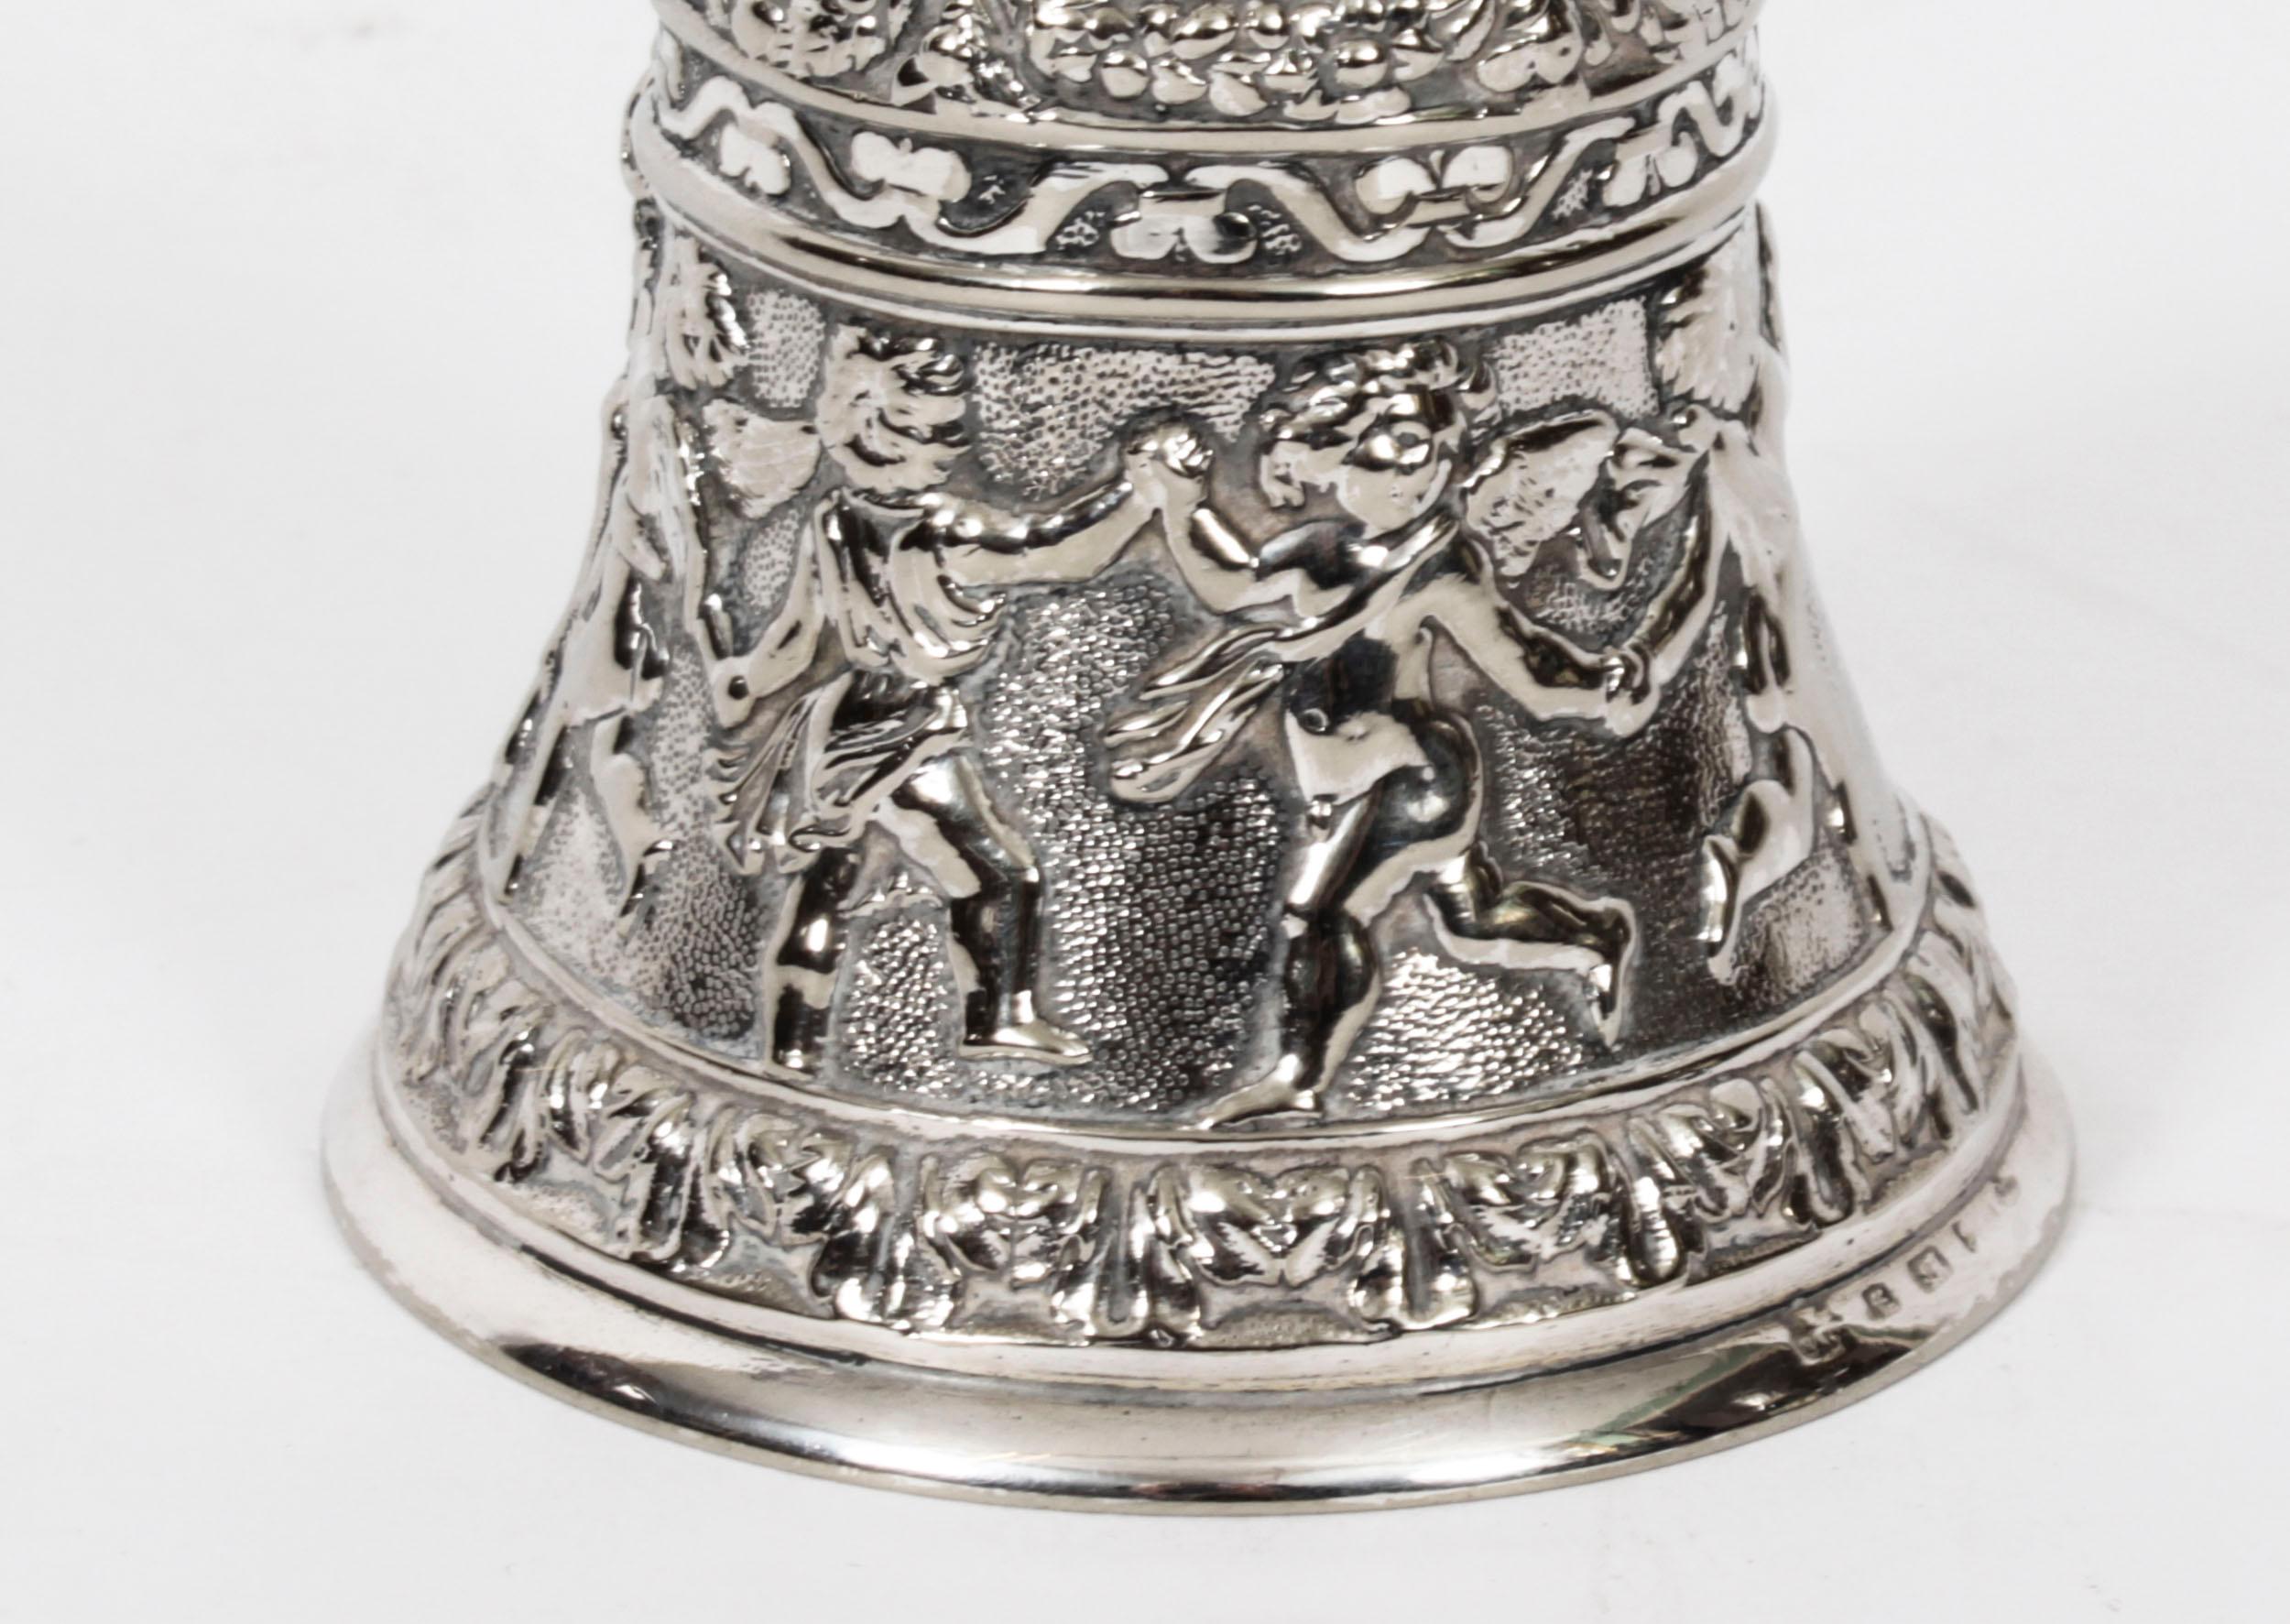 Antique Silver Plated Hand Bell Renaissance Revival 19th Century For Sale 4